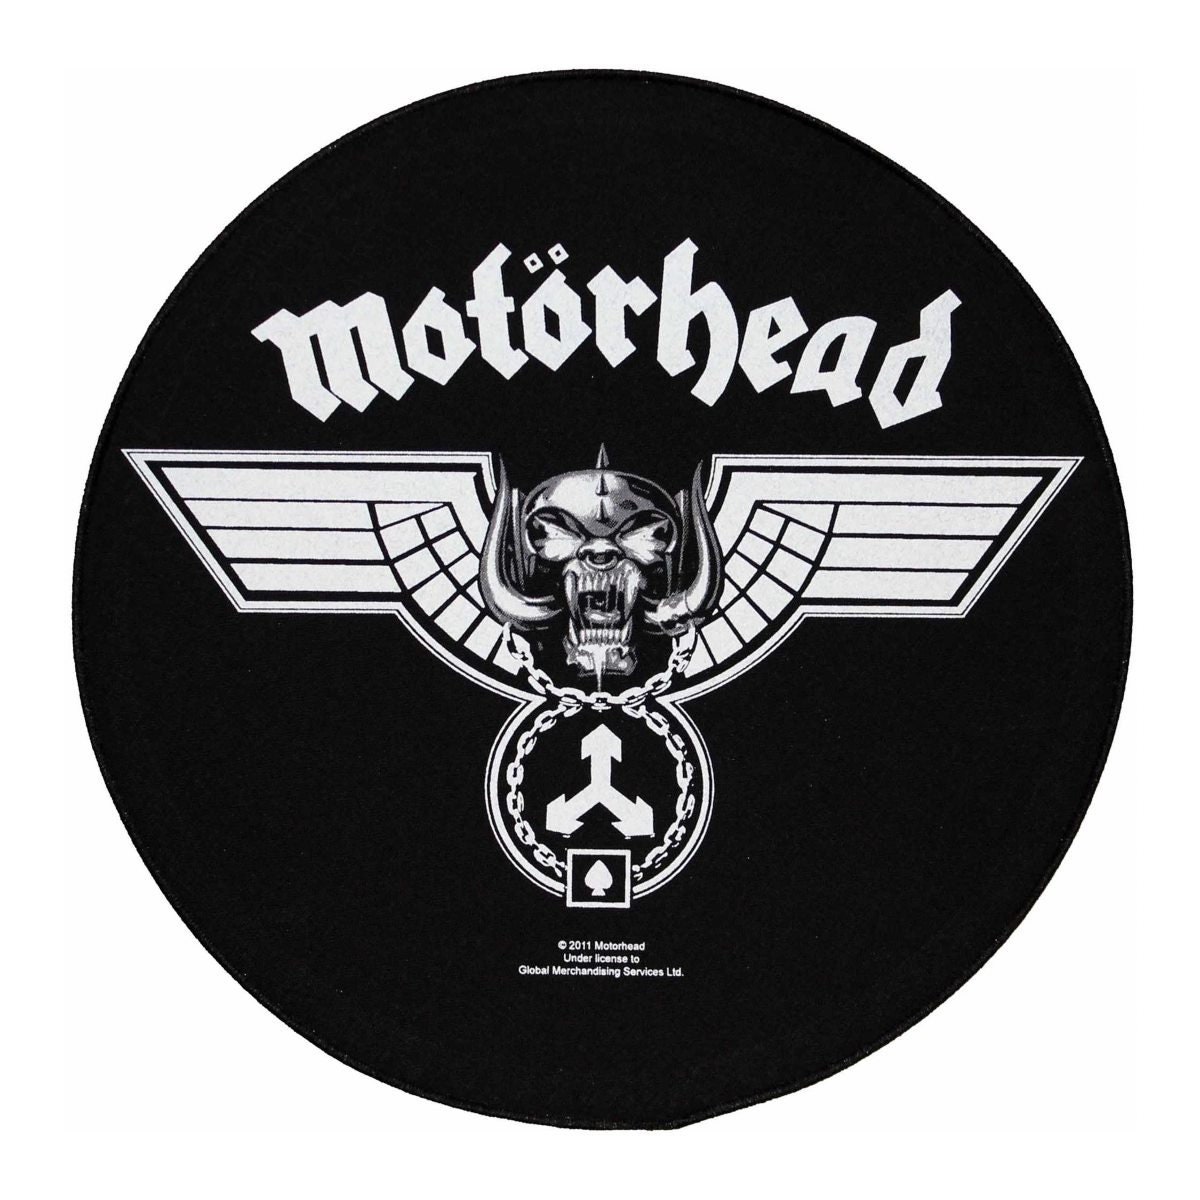 Motorhead Iron Fist Large Back Patch Official Licensed Heavy 